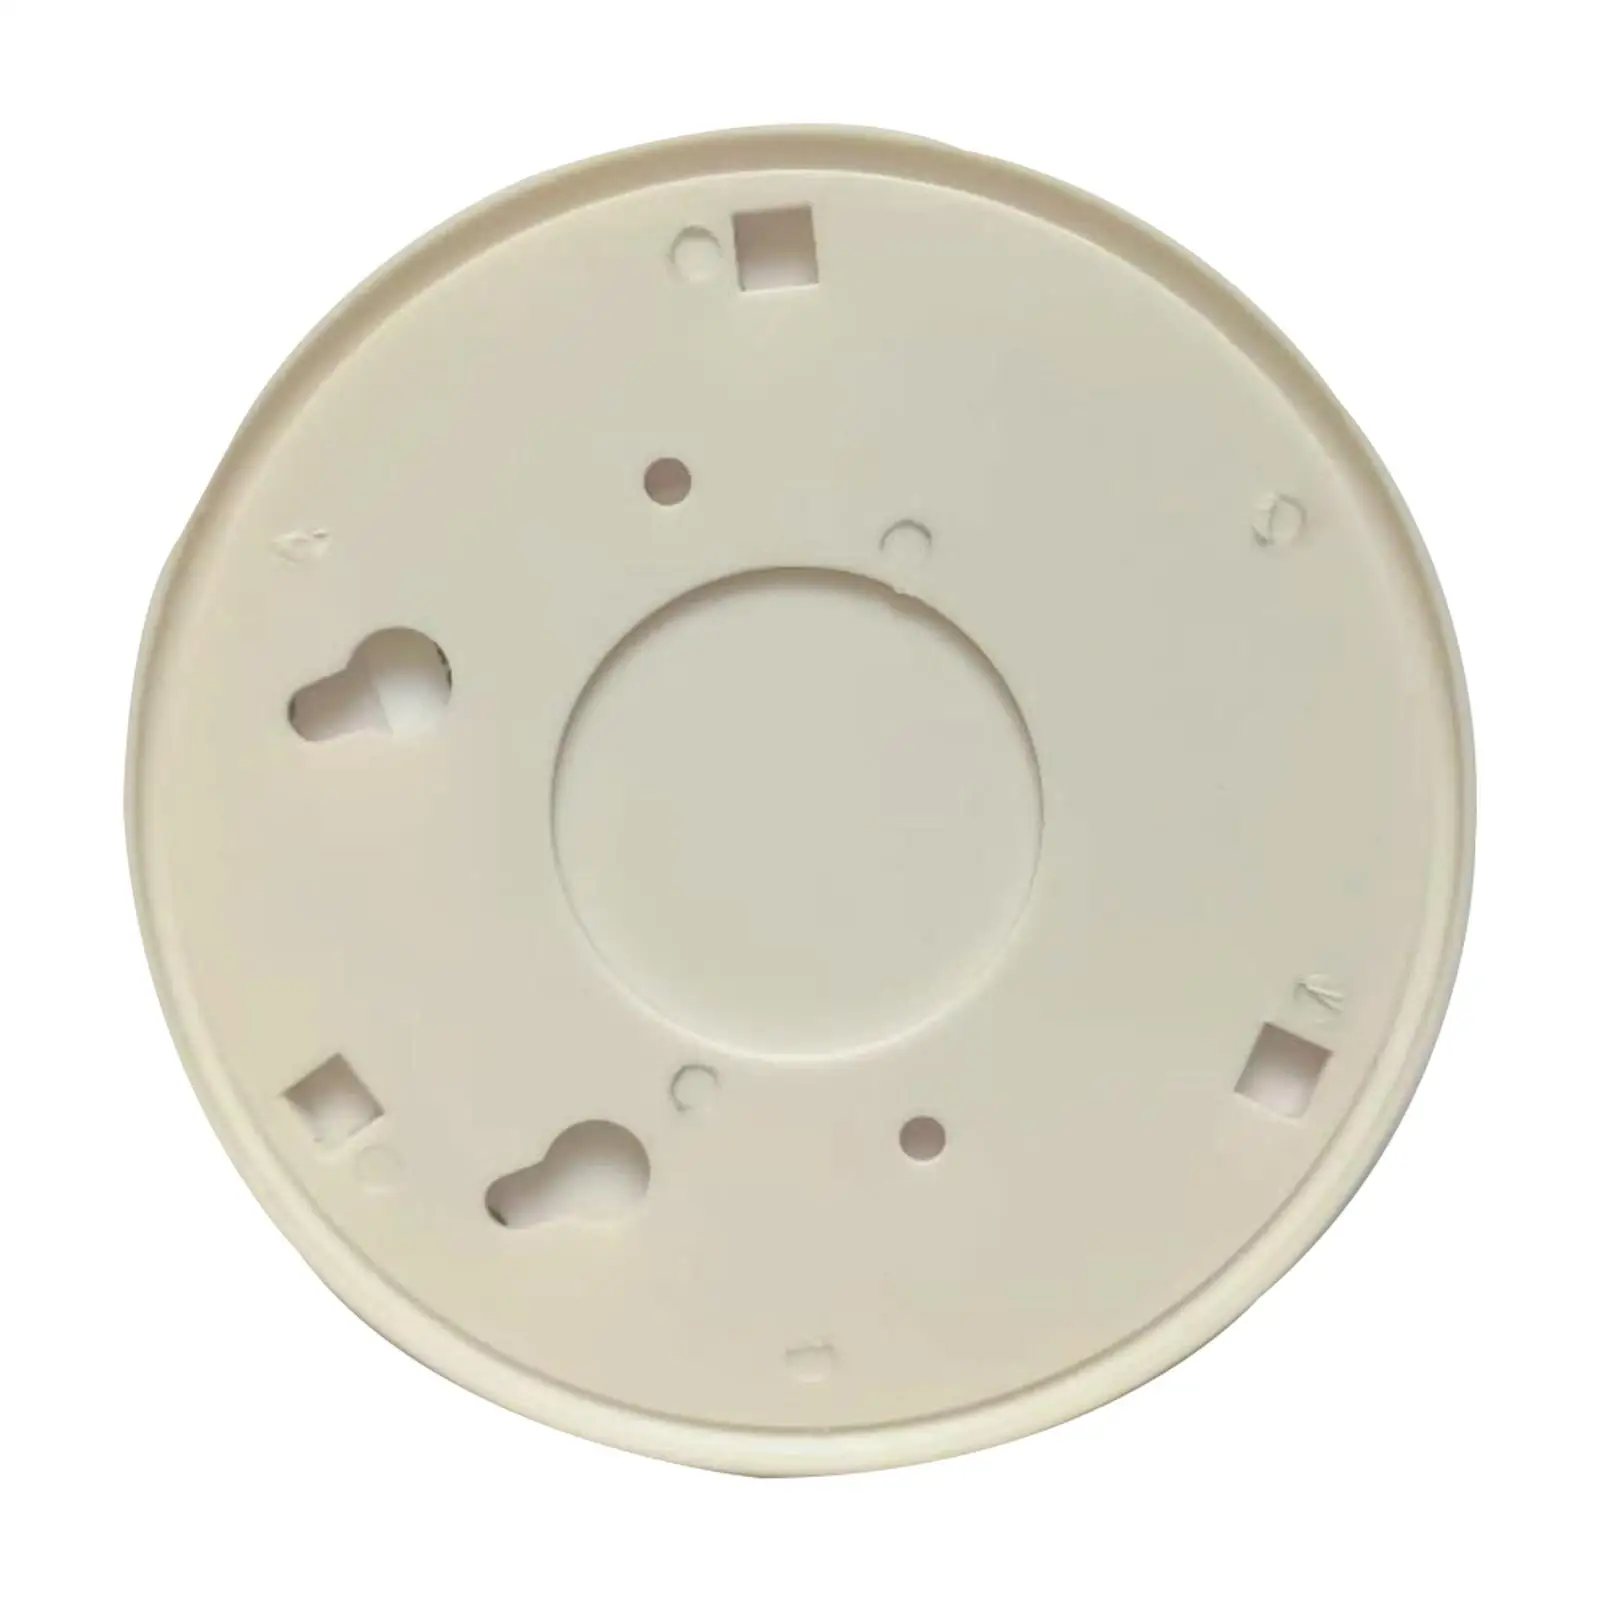 CO Alarm Detector Gas Detection Ceiling Mounted for Living Room Sound Alarm Easily Install Durable Professional White